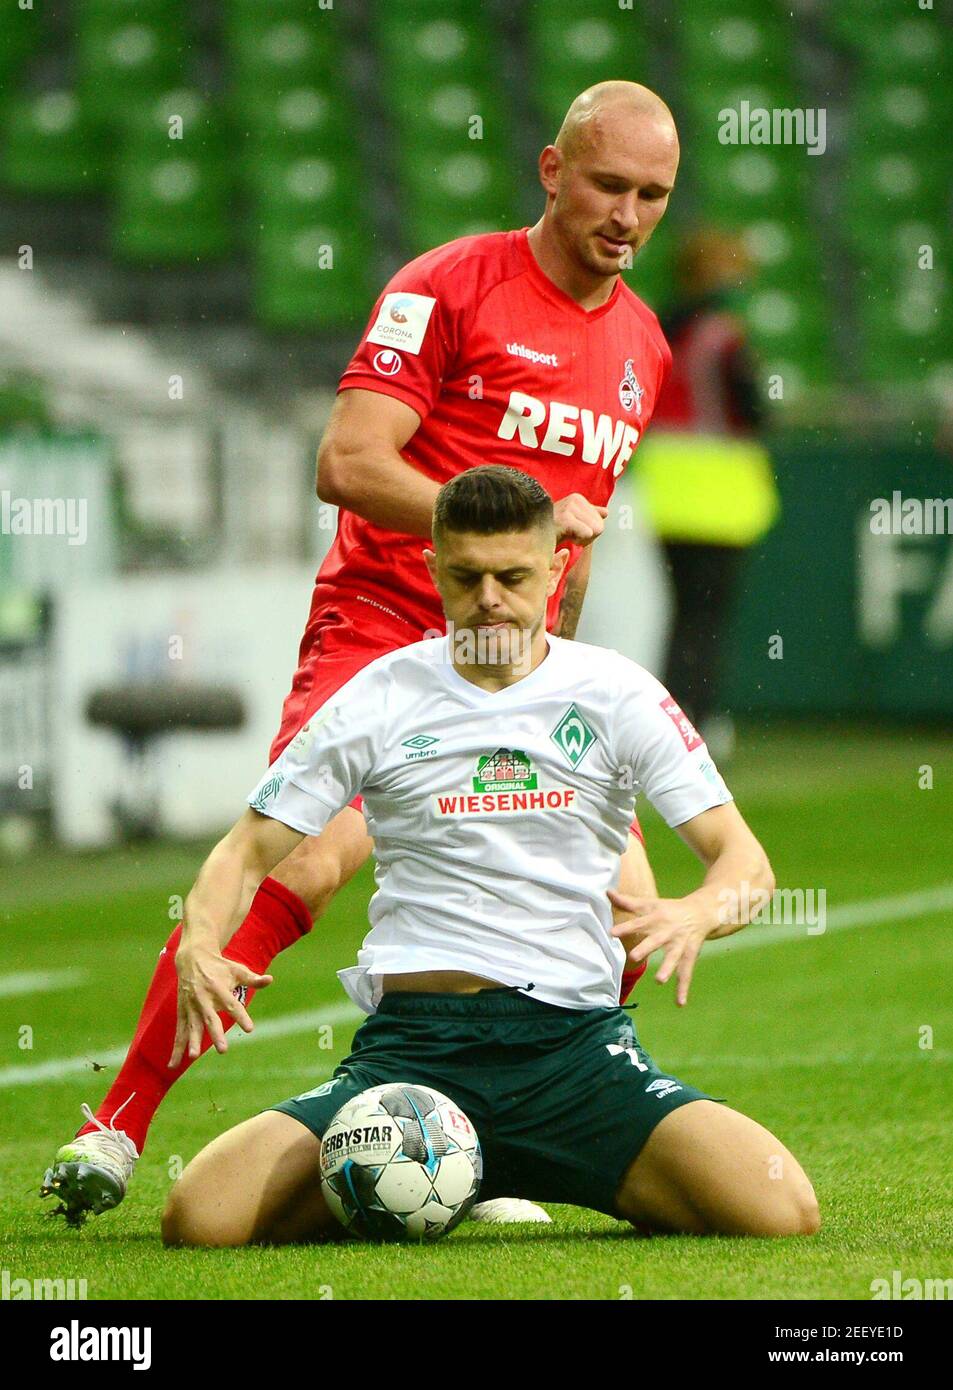 Soccer Football - Bundesliga - Werder Bremen v FC Cologne - Weser-Stadion, Bremen, Germany - June 27, 2020 Bremen's Milot Rashica in action with Cologne's Toni Leistner, following the resumption of play behind closed doors after the outbreak of the coronavirus disease (COVID-19)  Patrik Stollarz/Pool via REUTERS  DFL regulations prohibit any use of photographs as image sequences and/or quasi-video Stock Photo